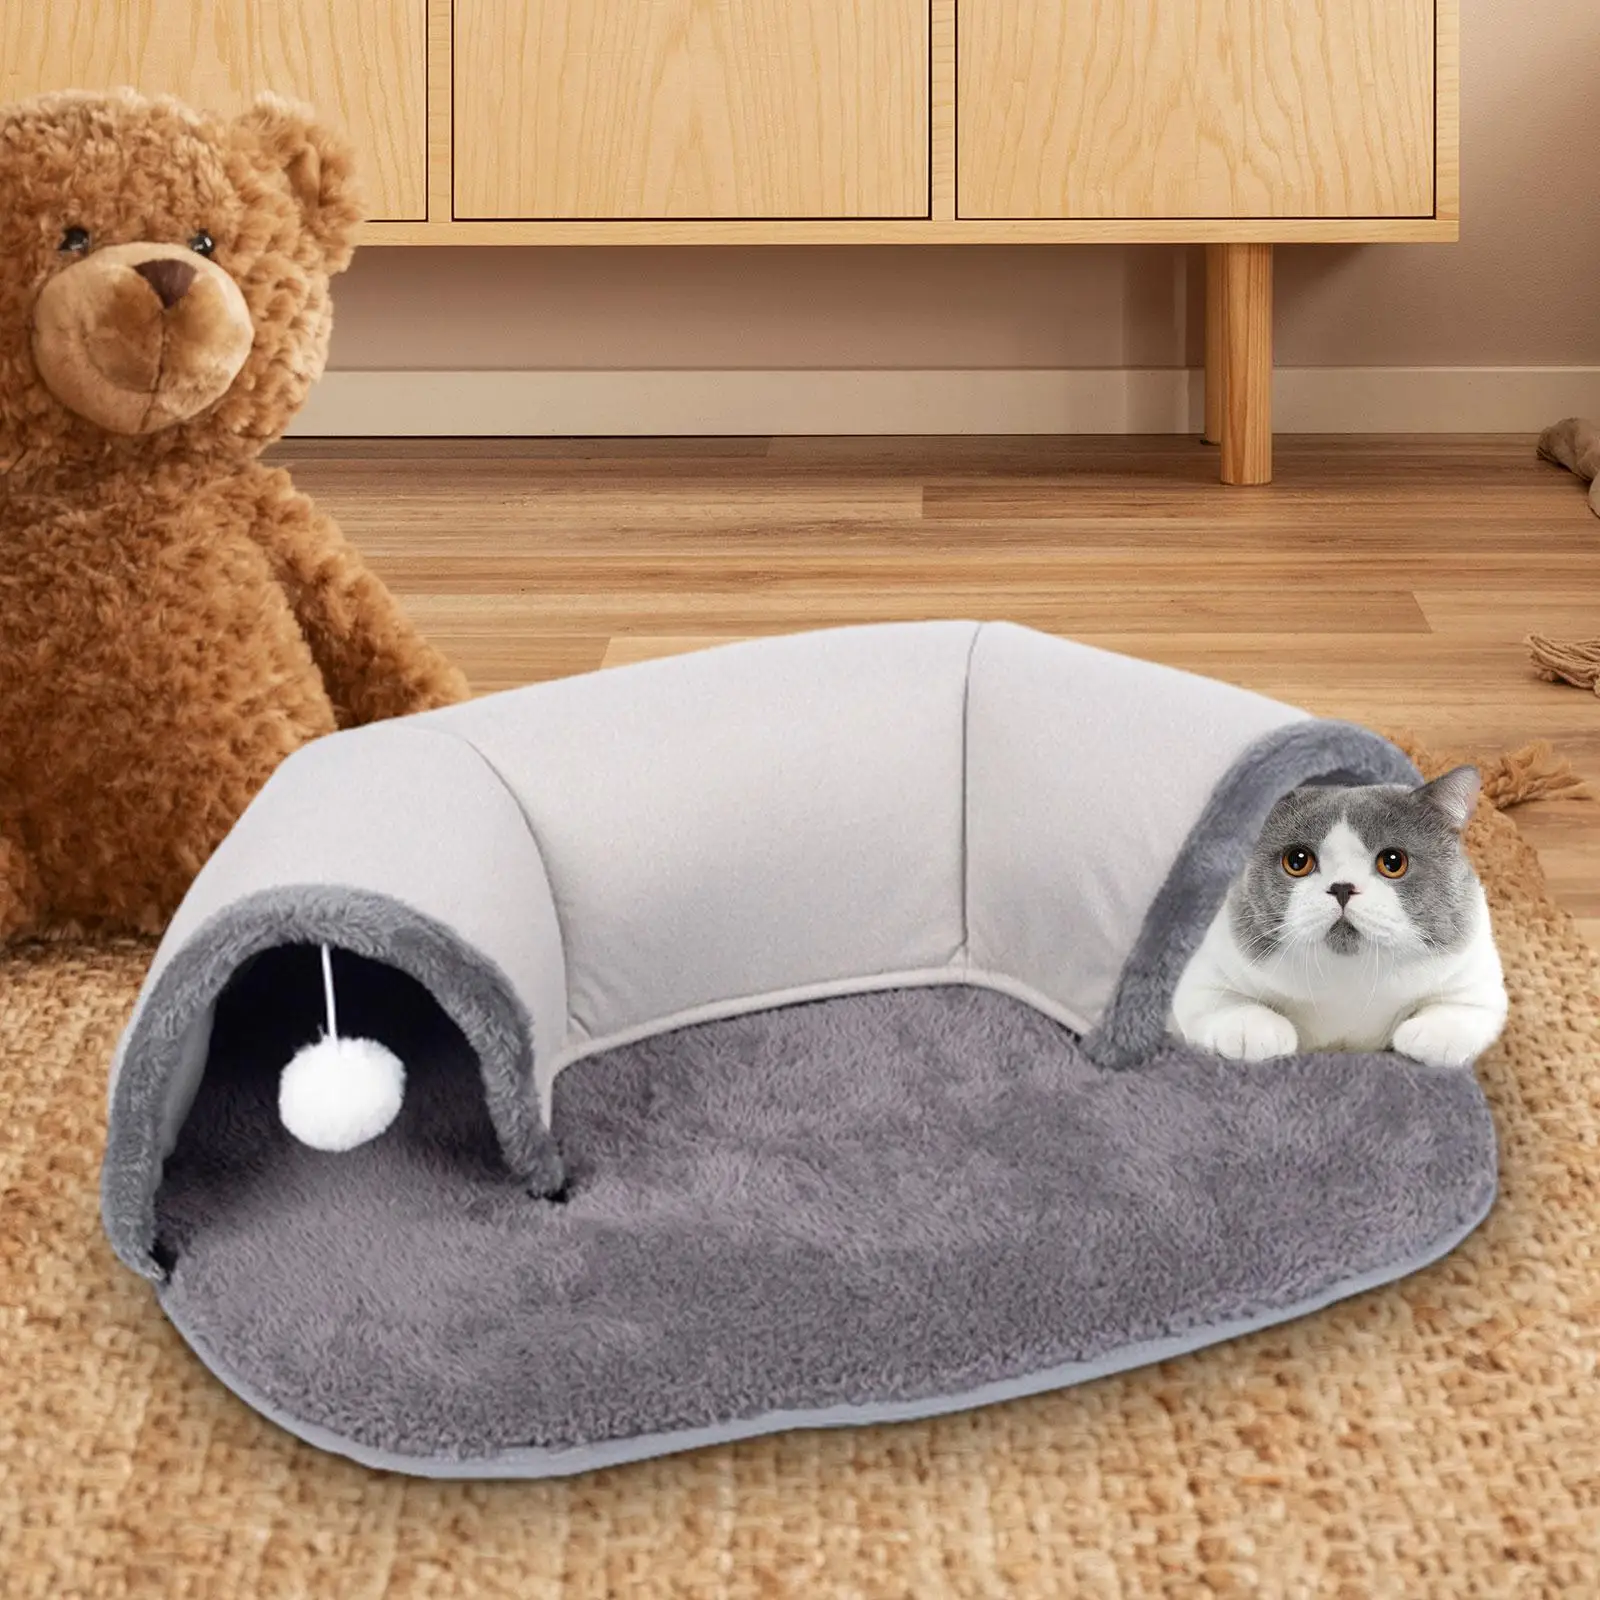 Cat Tunnel and Bed Toy Set for Indoor Cats Multifunctional Machine Washable Cat House with Toy Ball Playing Fun Exercise